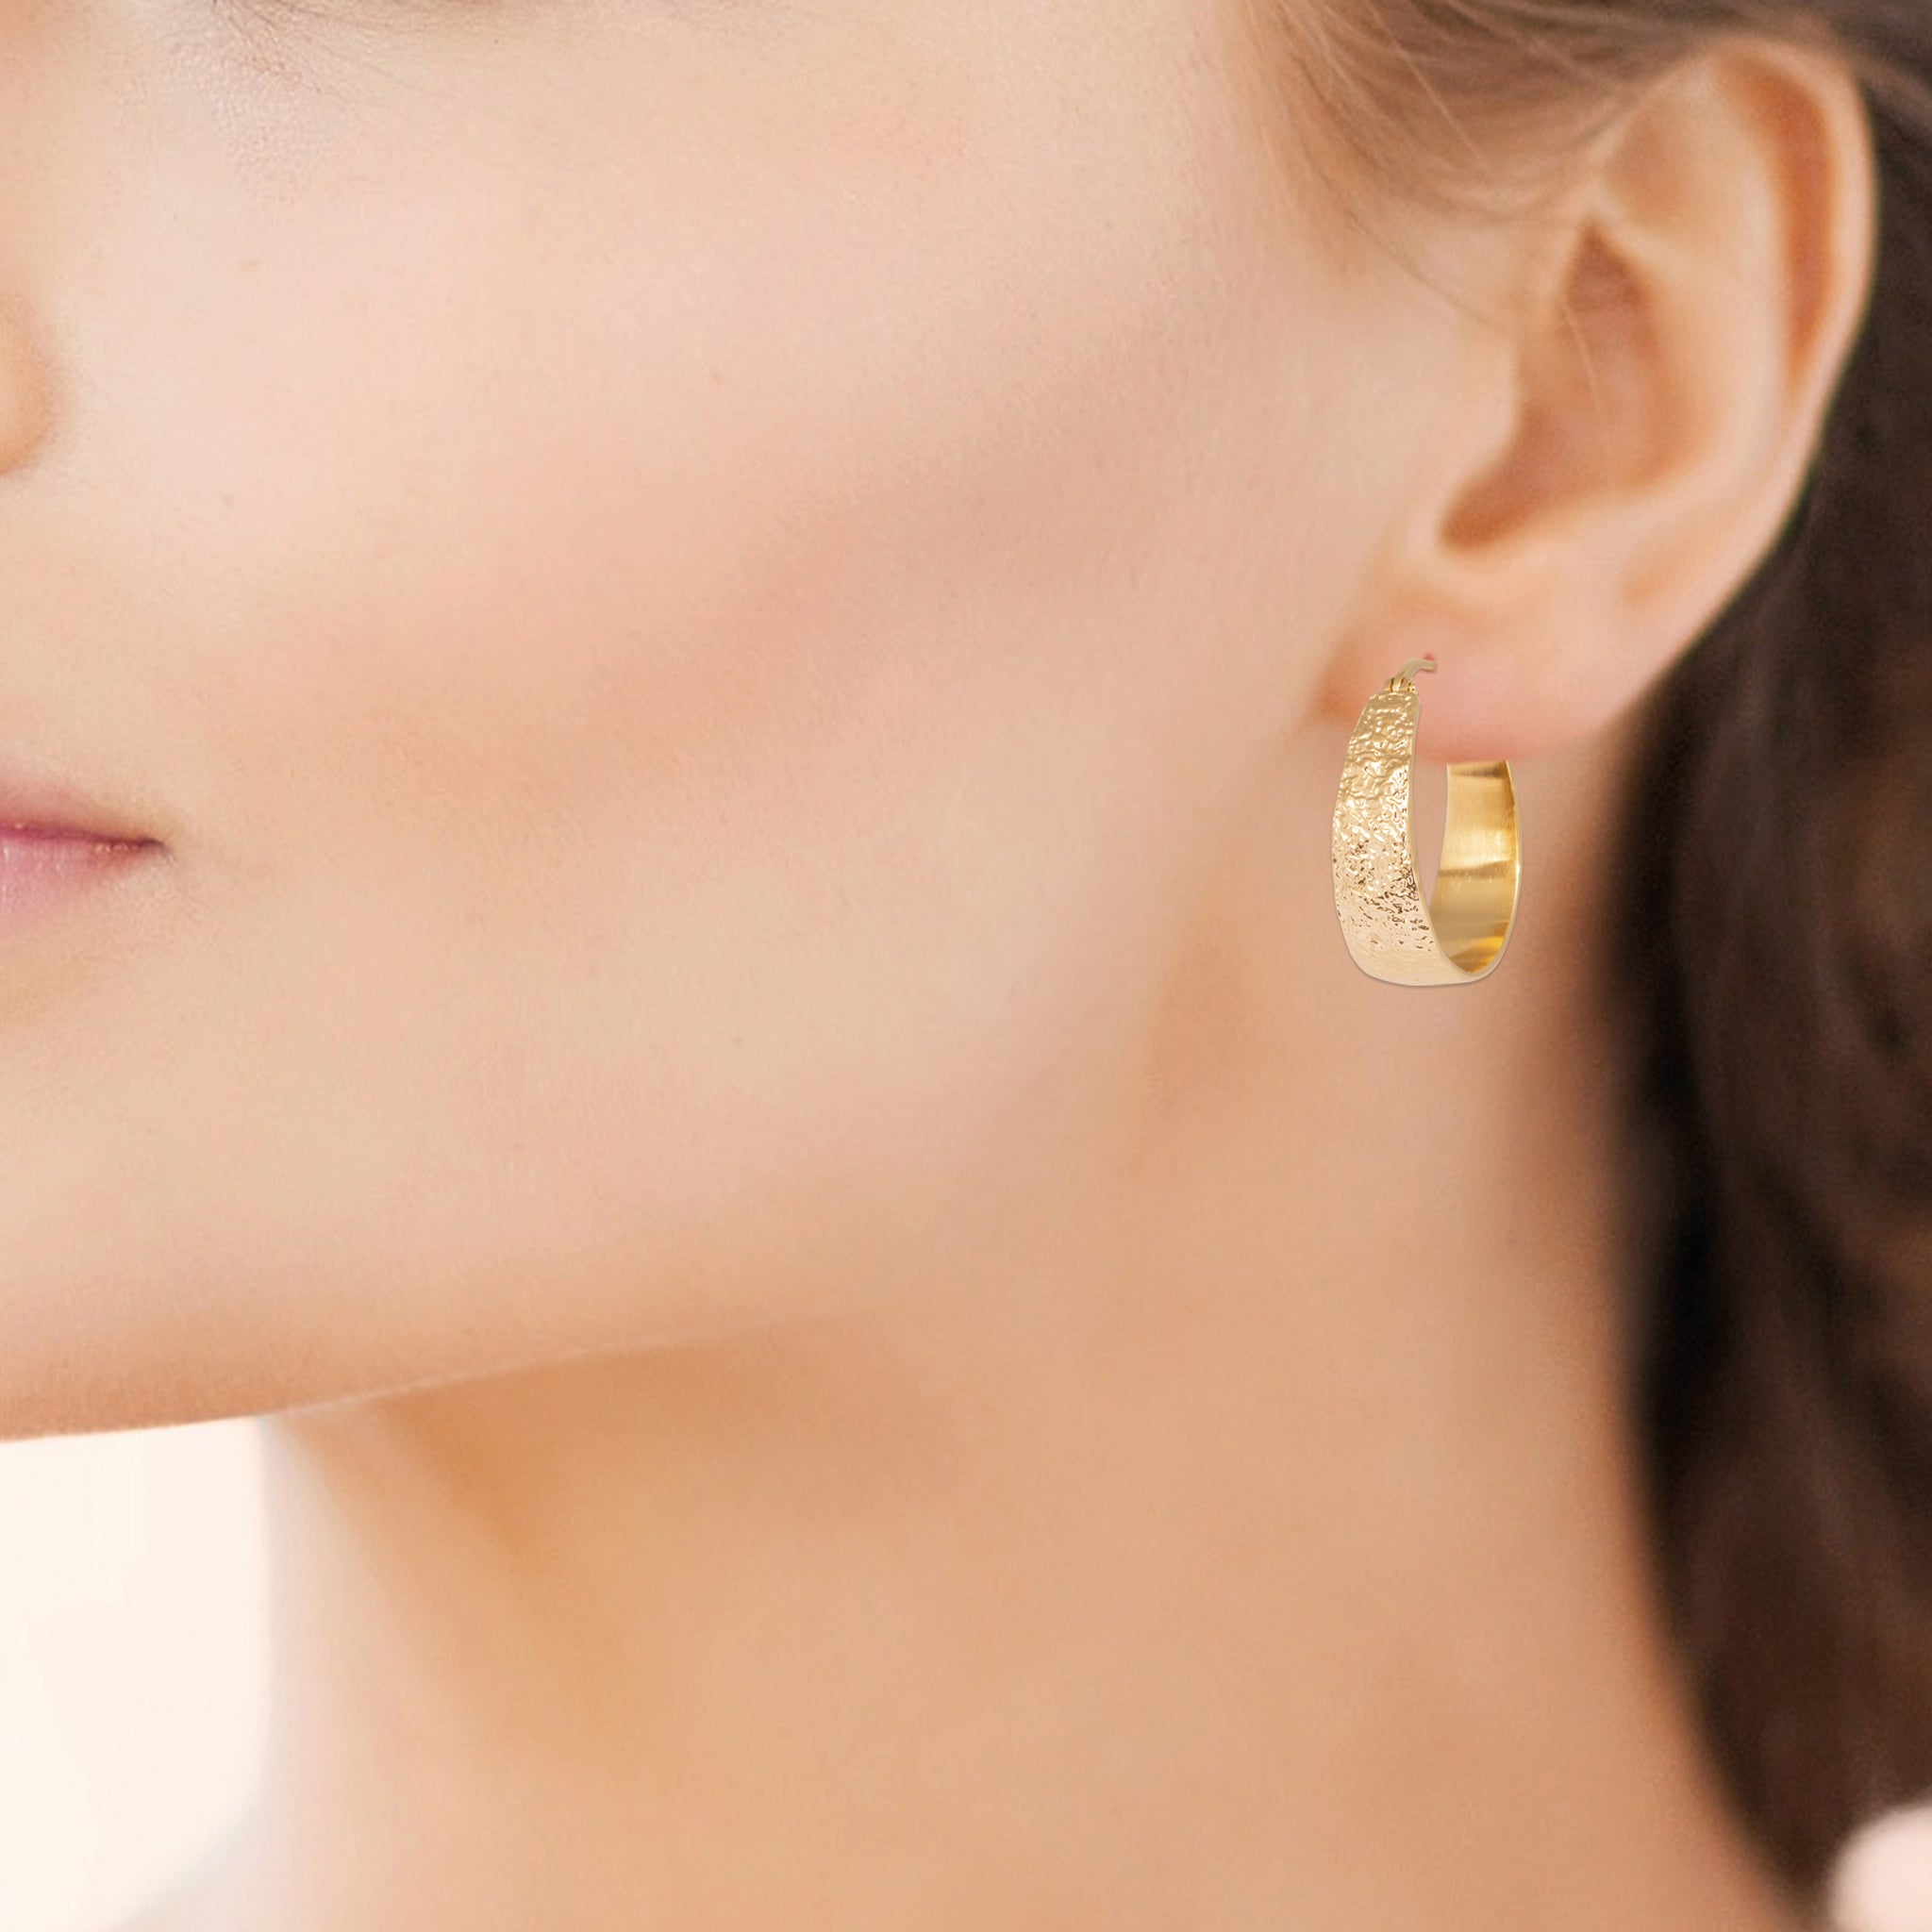 18ct Yellow Gold Plated Hoop Earrings